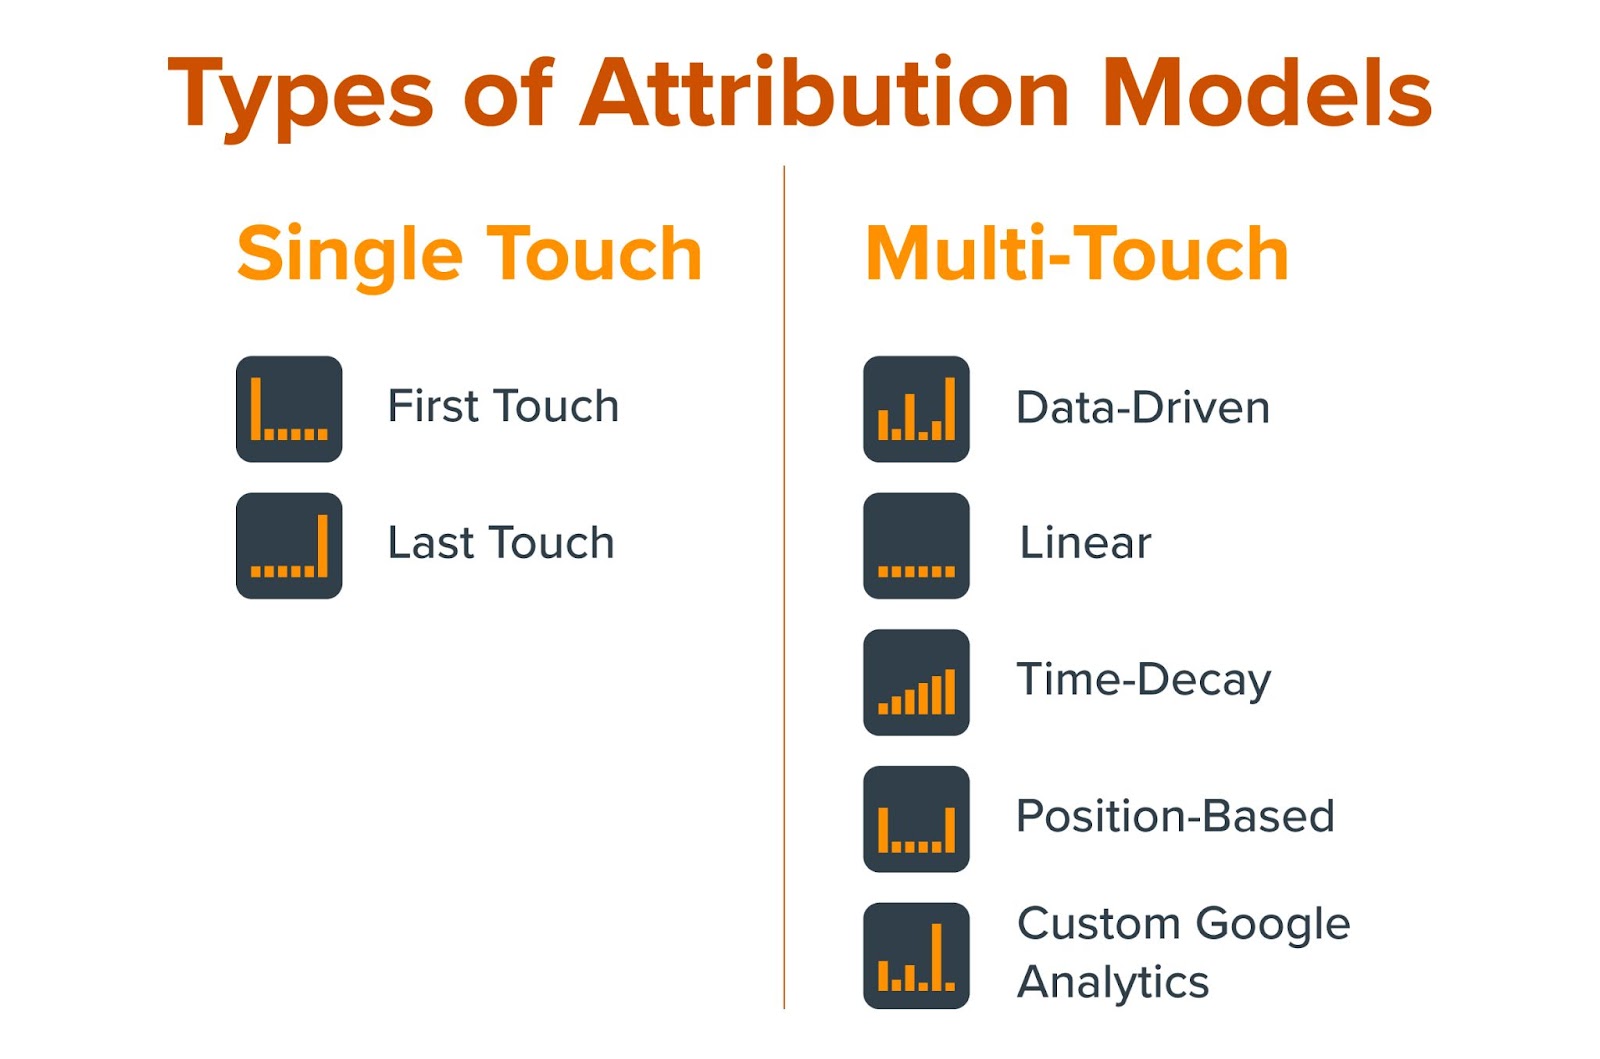 An image that compares single-touch vs. multi-touch attribution models.